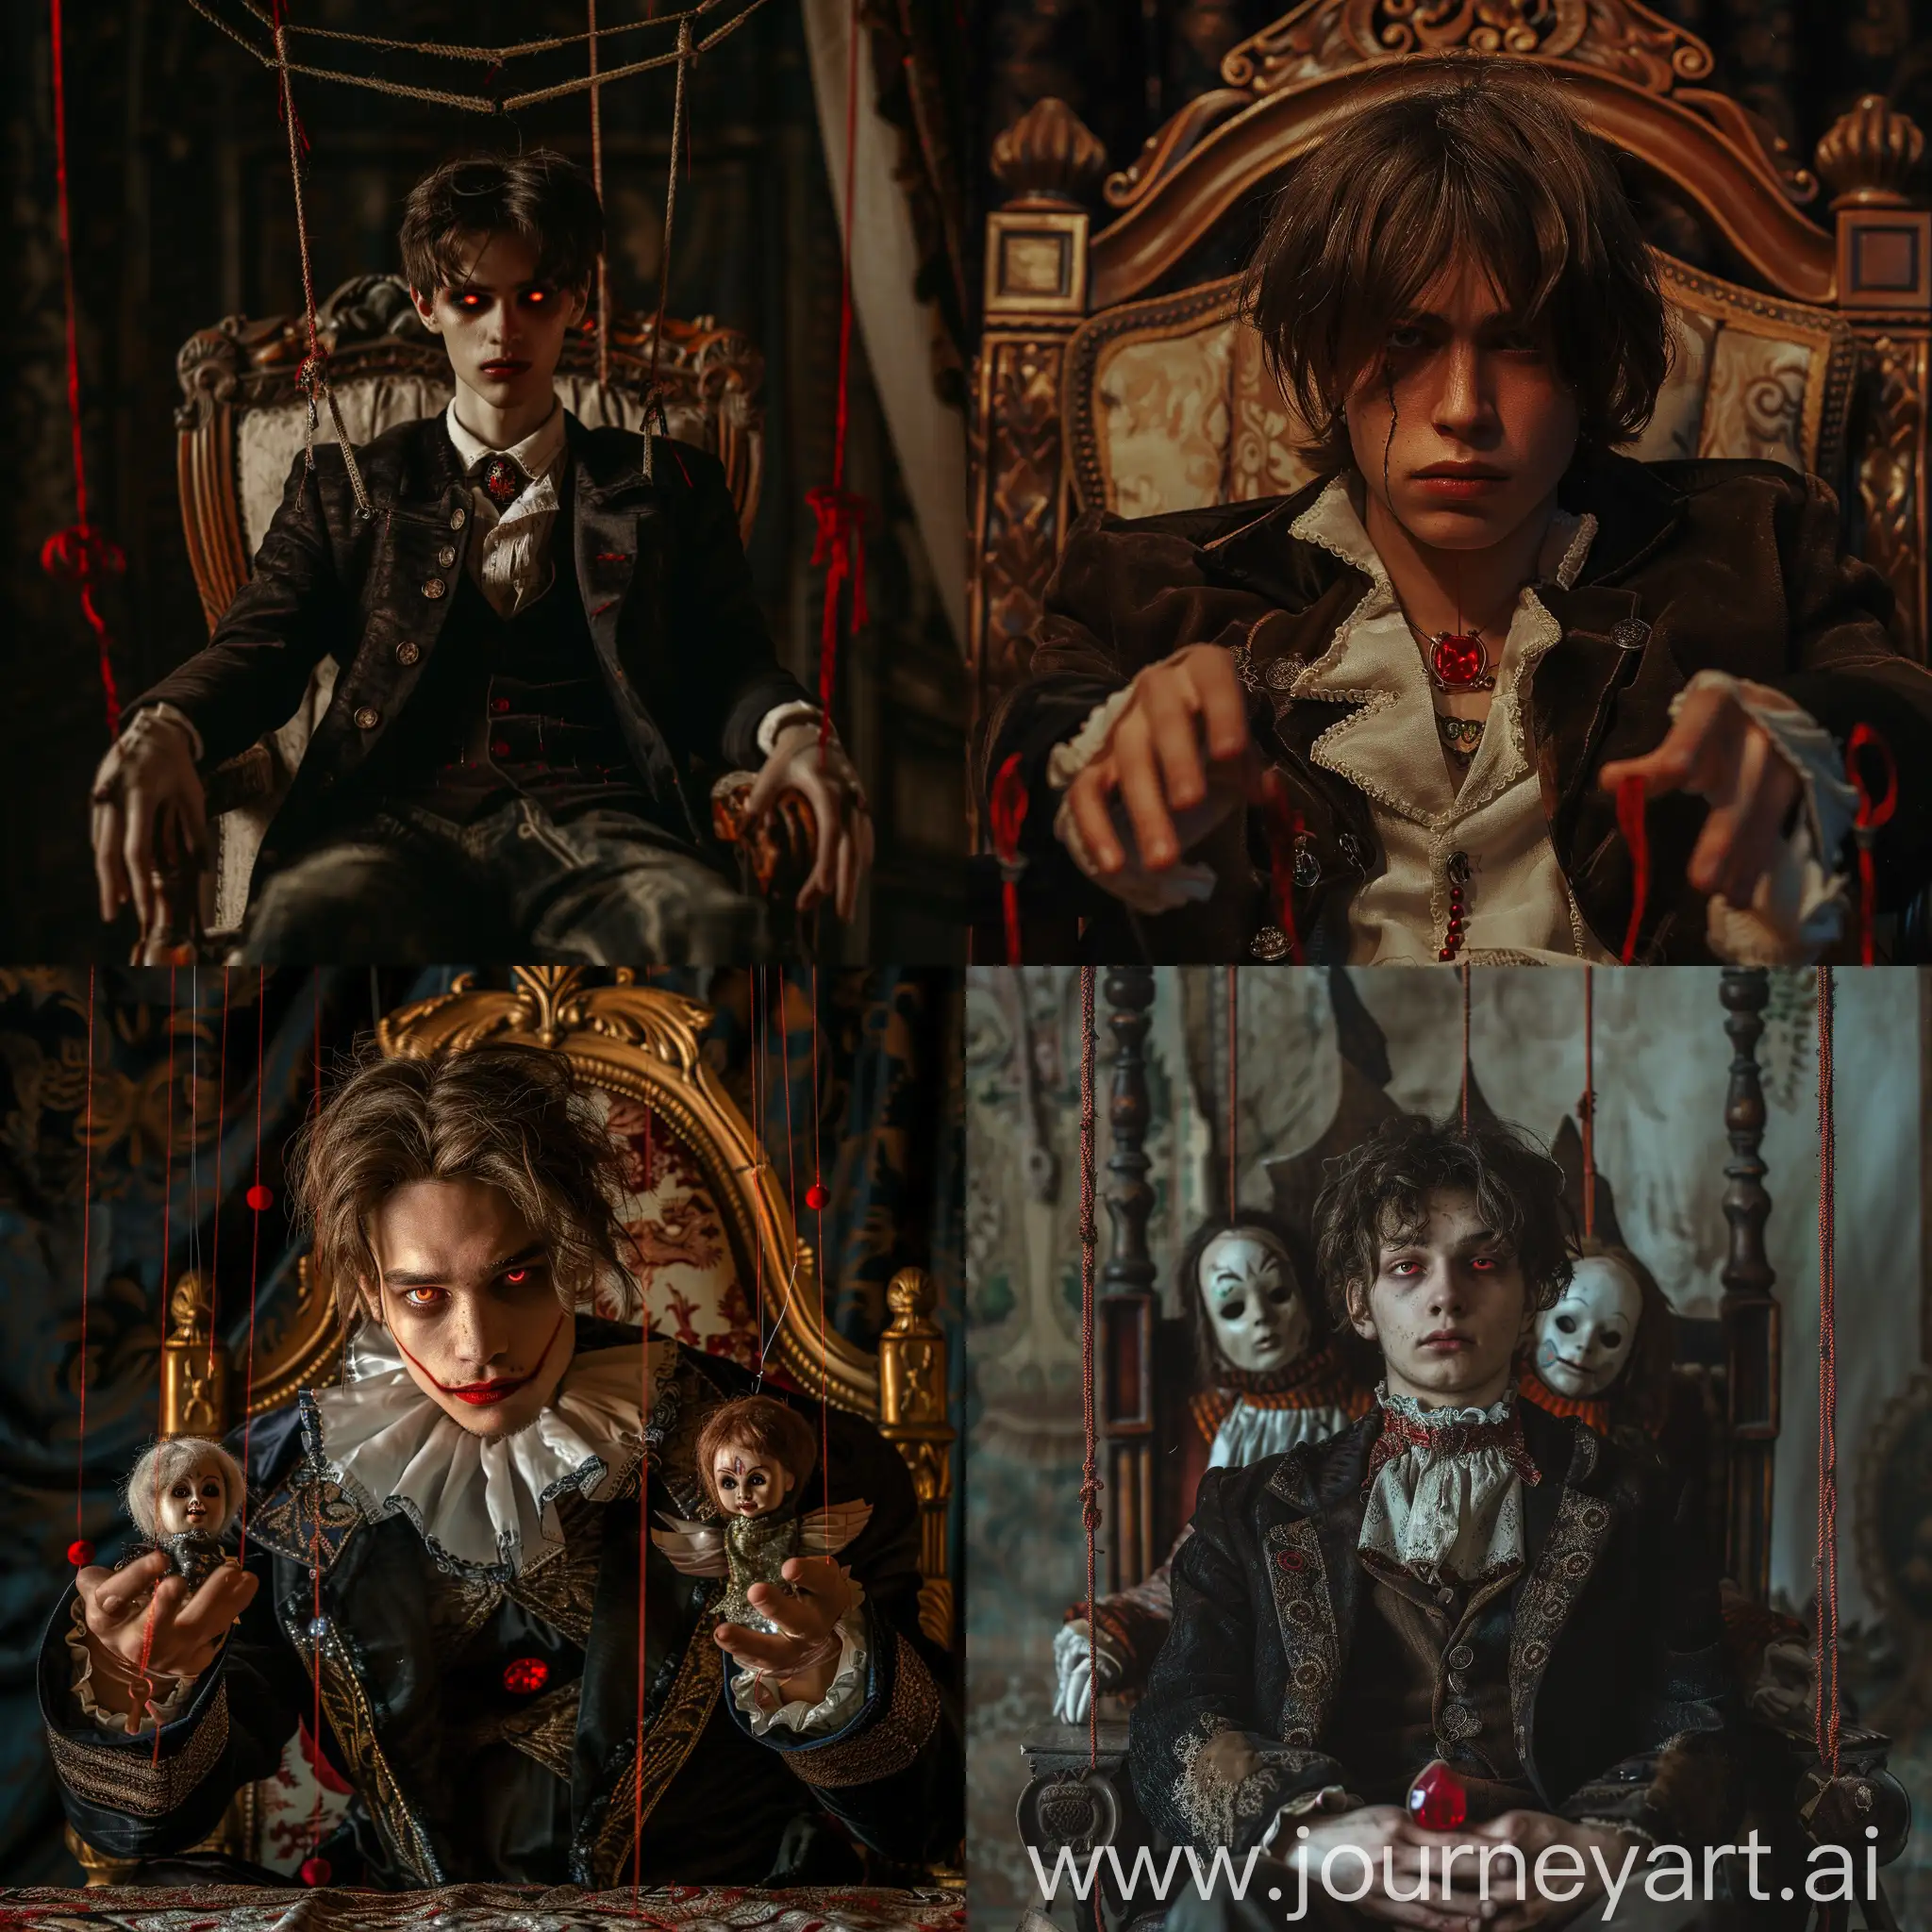 Young-Man-with-Red-Eyes-Controlling-Puppets-on-Throne